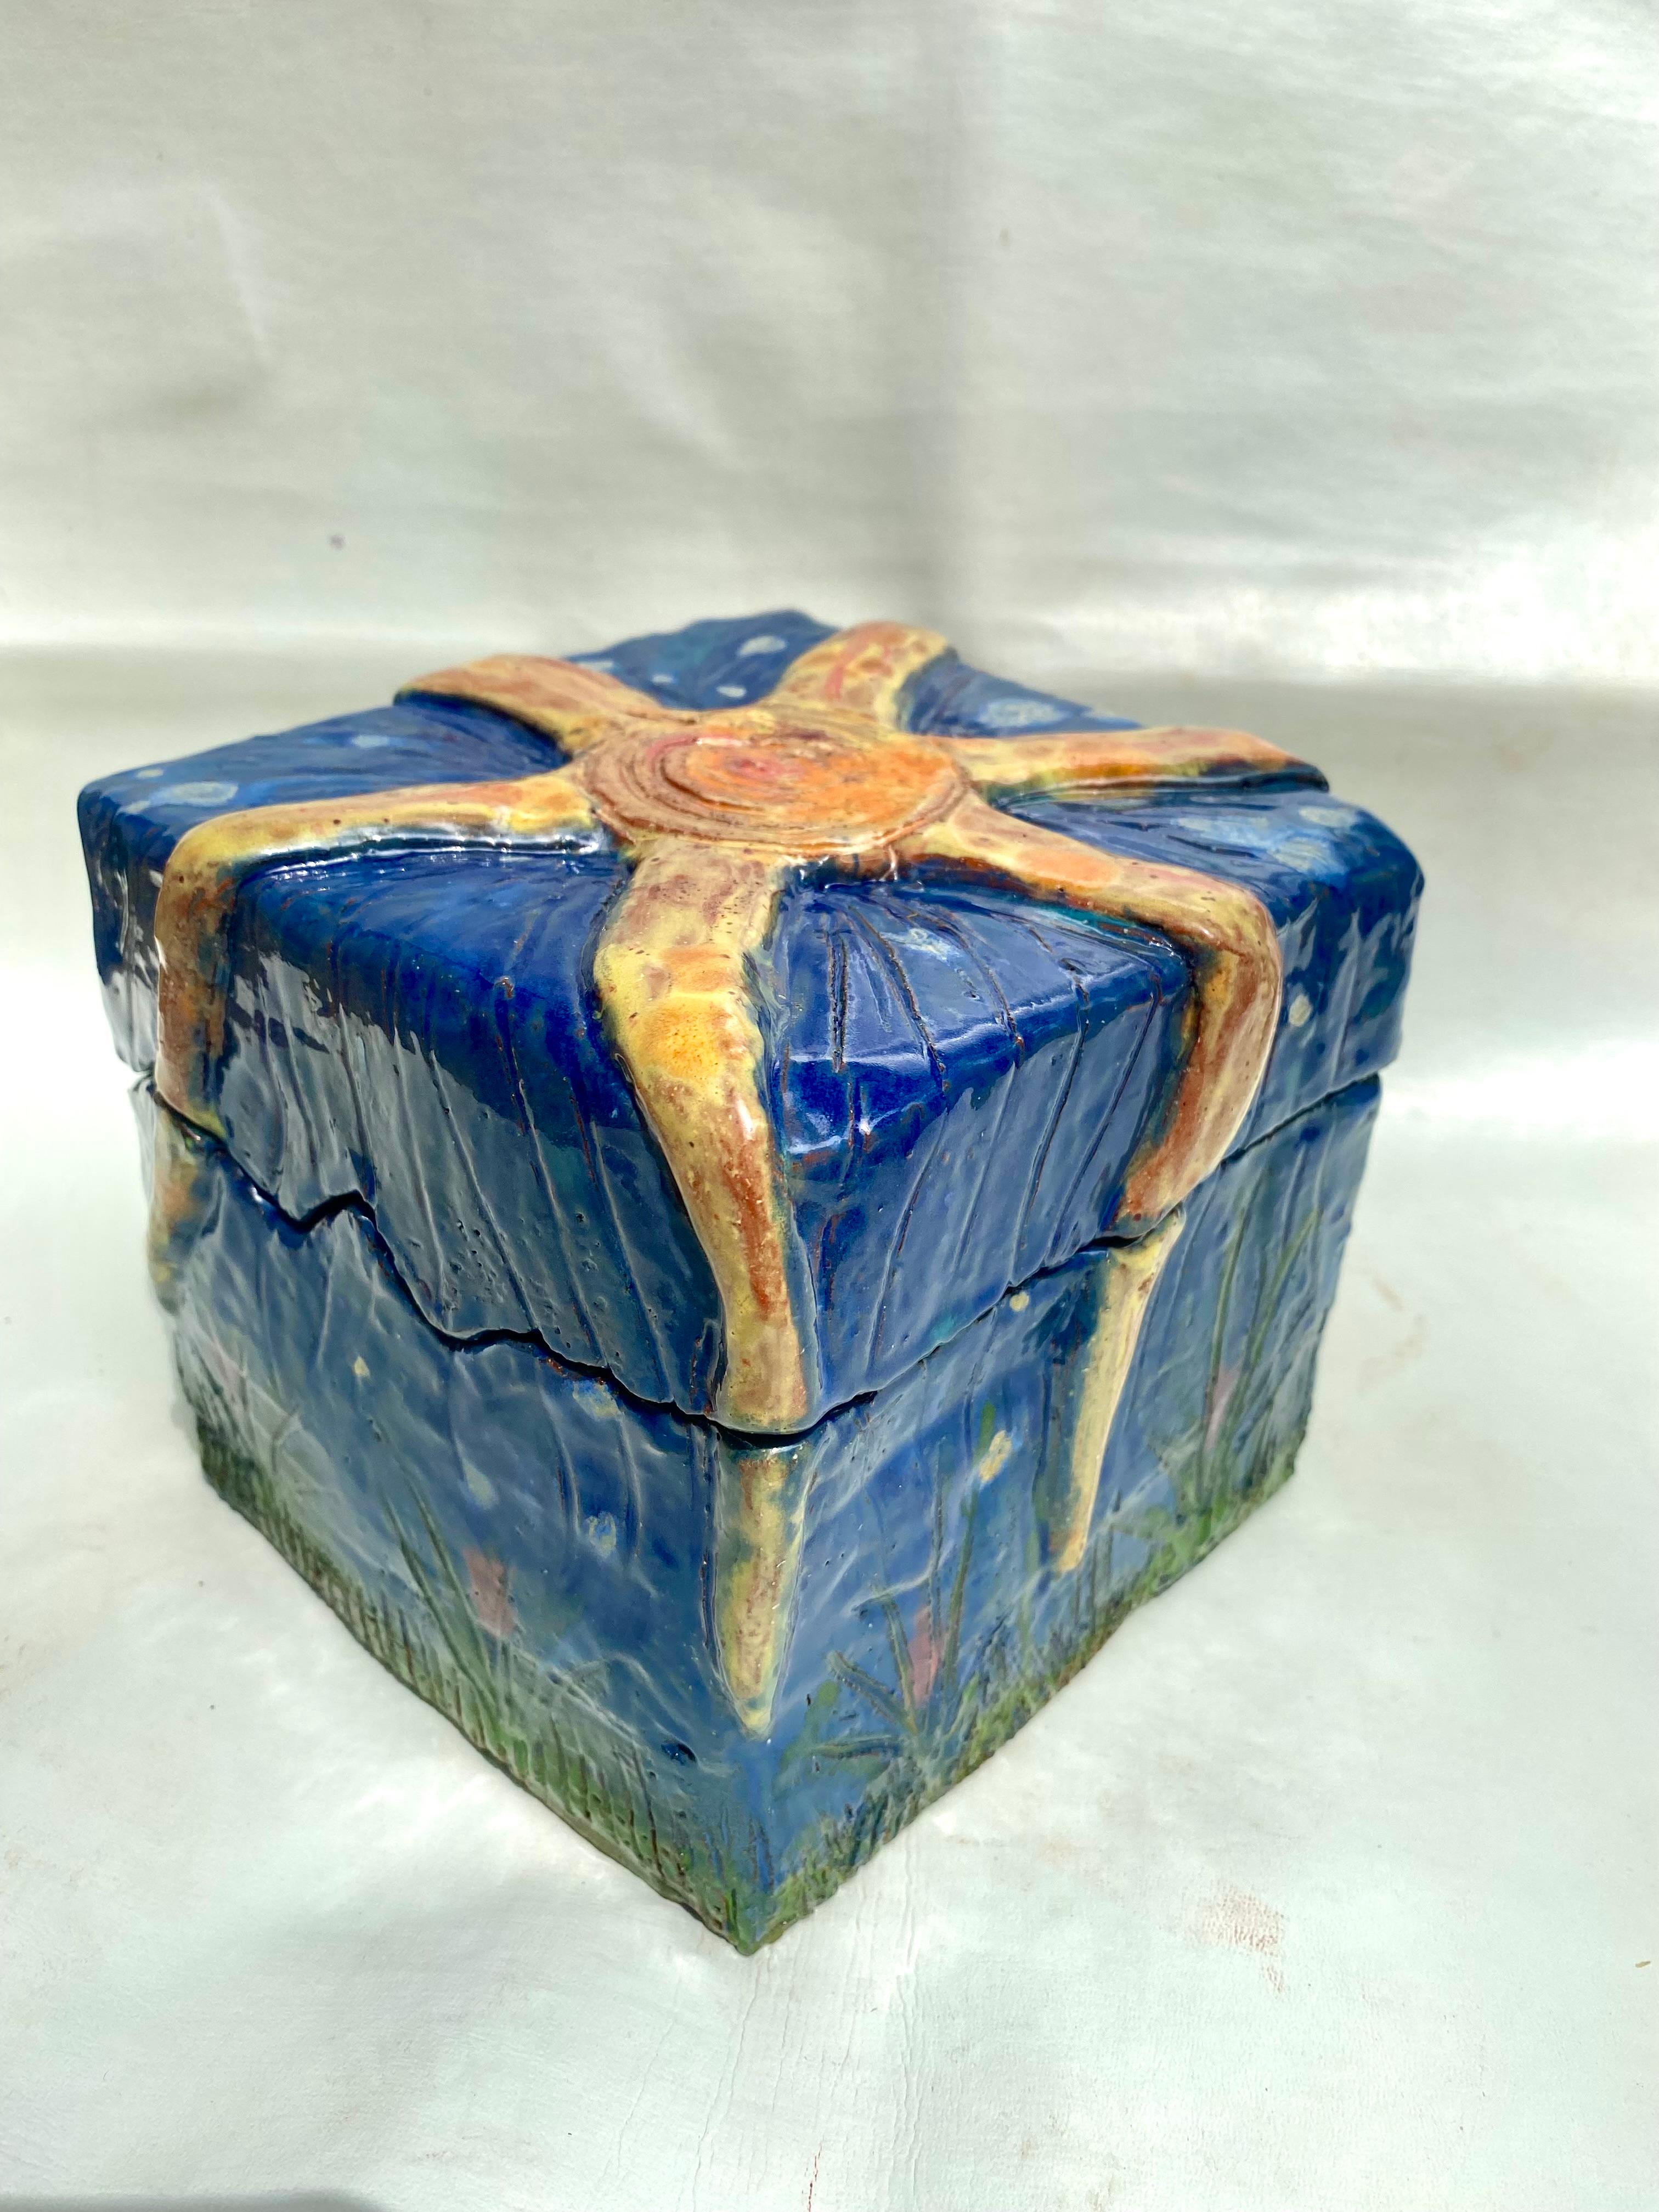 Hand Built Abstract Sculptural Glazed Ceramic Box. Fitted Lid

Offered for sale is a handmade abstract form ceramic box that is signed and dated by Rexx Fischer. The box is both functional and a sculptural object. Rexx is a painter and ceramicist.